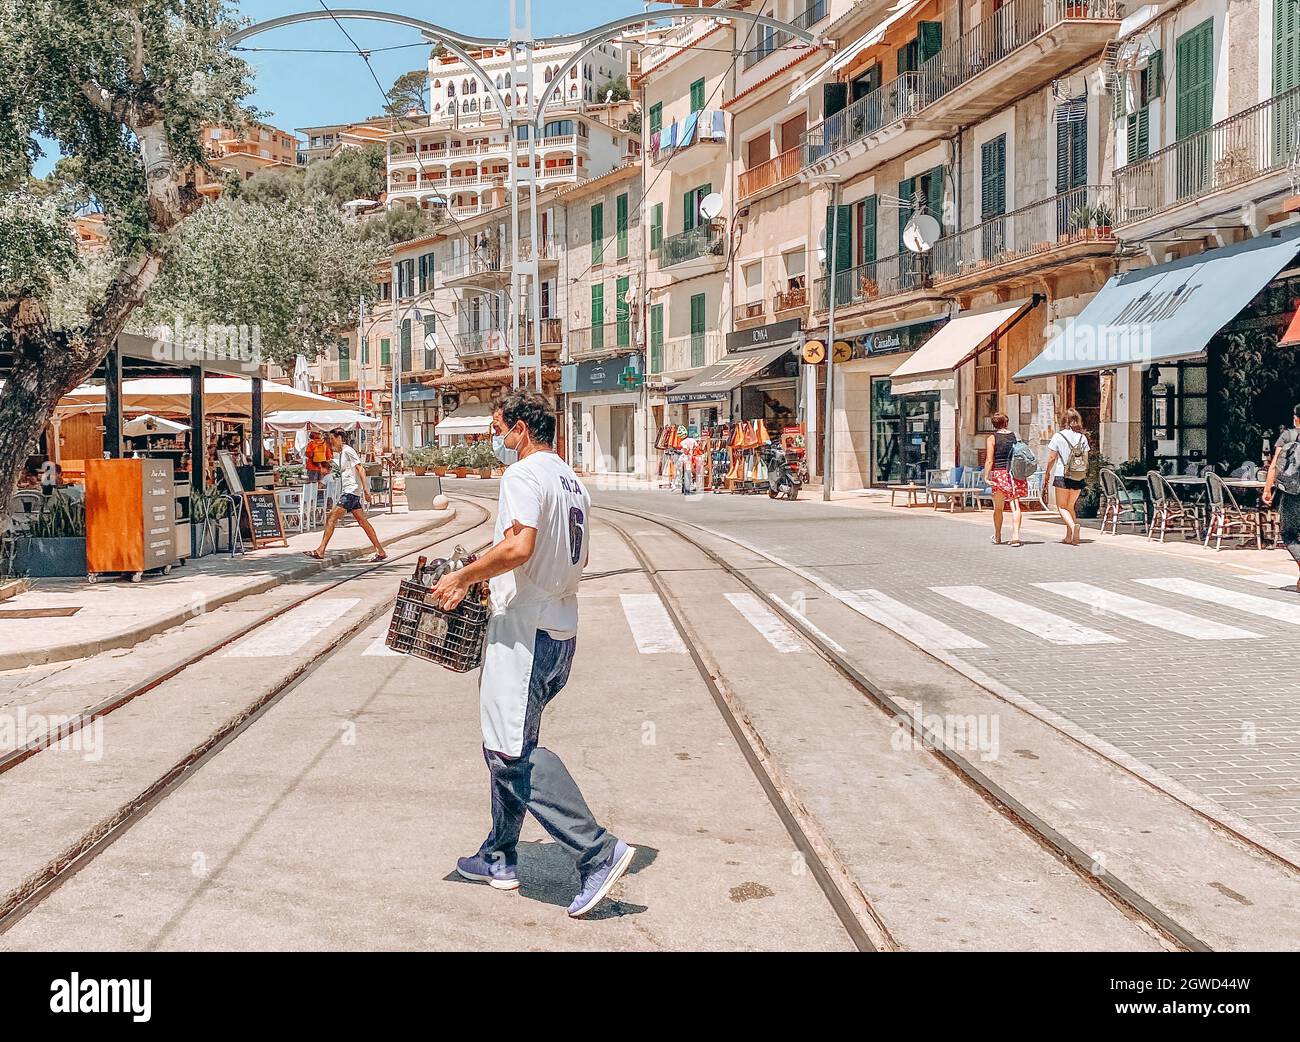 Waiter carrying a case across a street with tram tracks Stock Photo